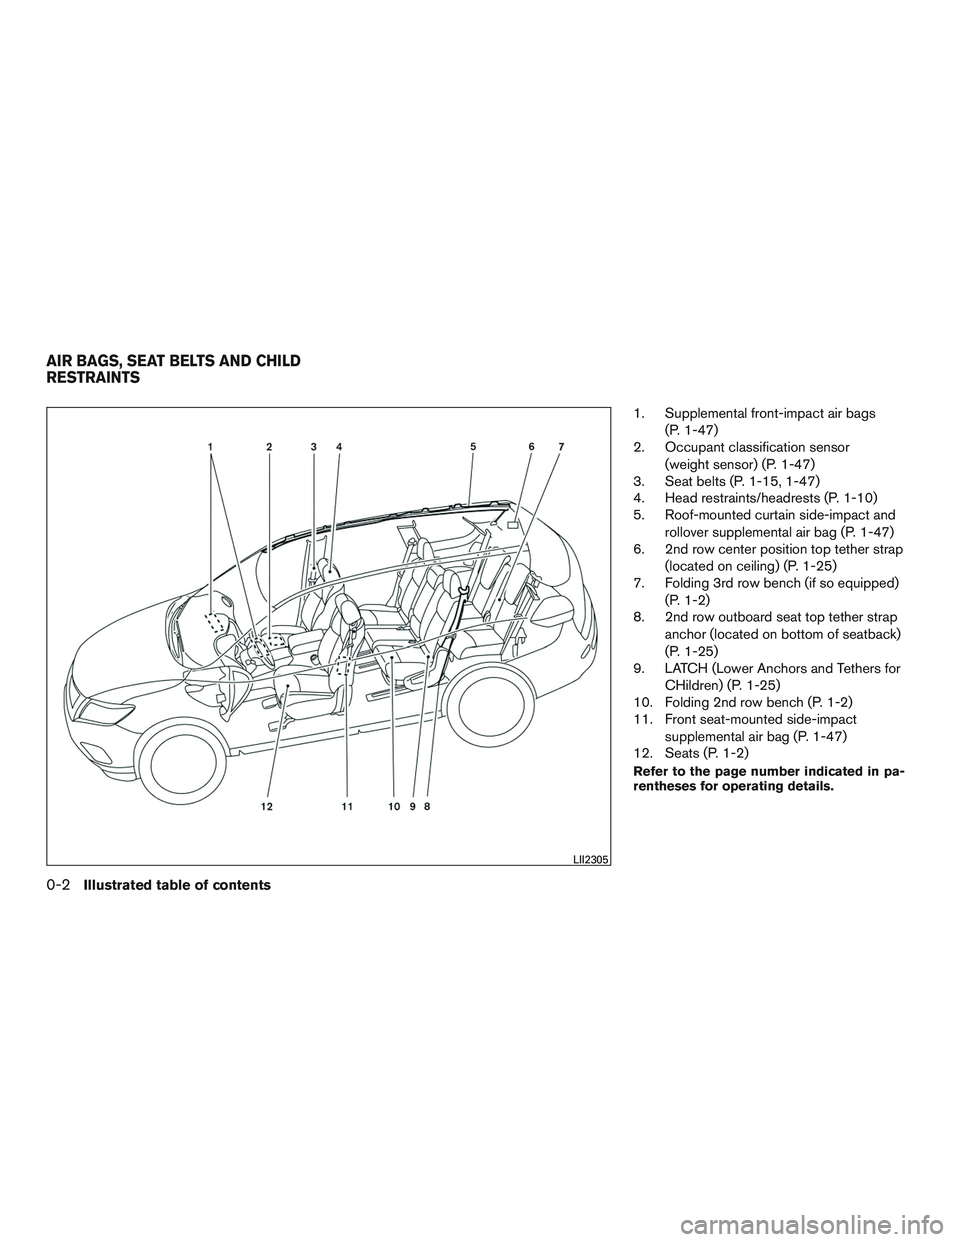 NISSAN ROGUE 2016  Owner´s Manual 1. Supplemental front-impact air bags(P. 1-47)
2. Occupant classification sensor
(weight sensor) (P. 1-47)
3. Seat belts (P. 1-15, 1-47)
4. Head restraints/headrests (P. 1-10)
5. Roof-mounted curtain 